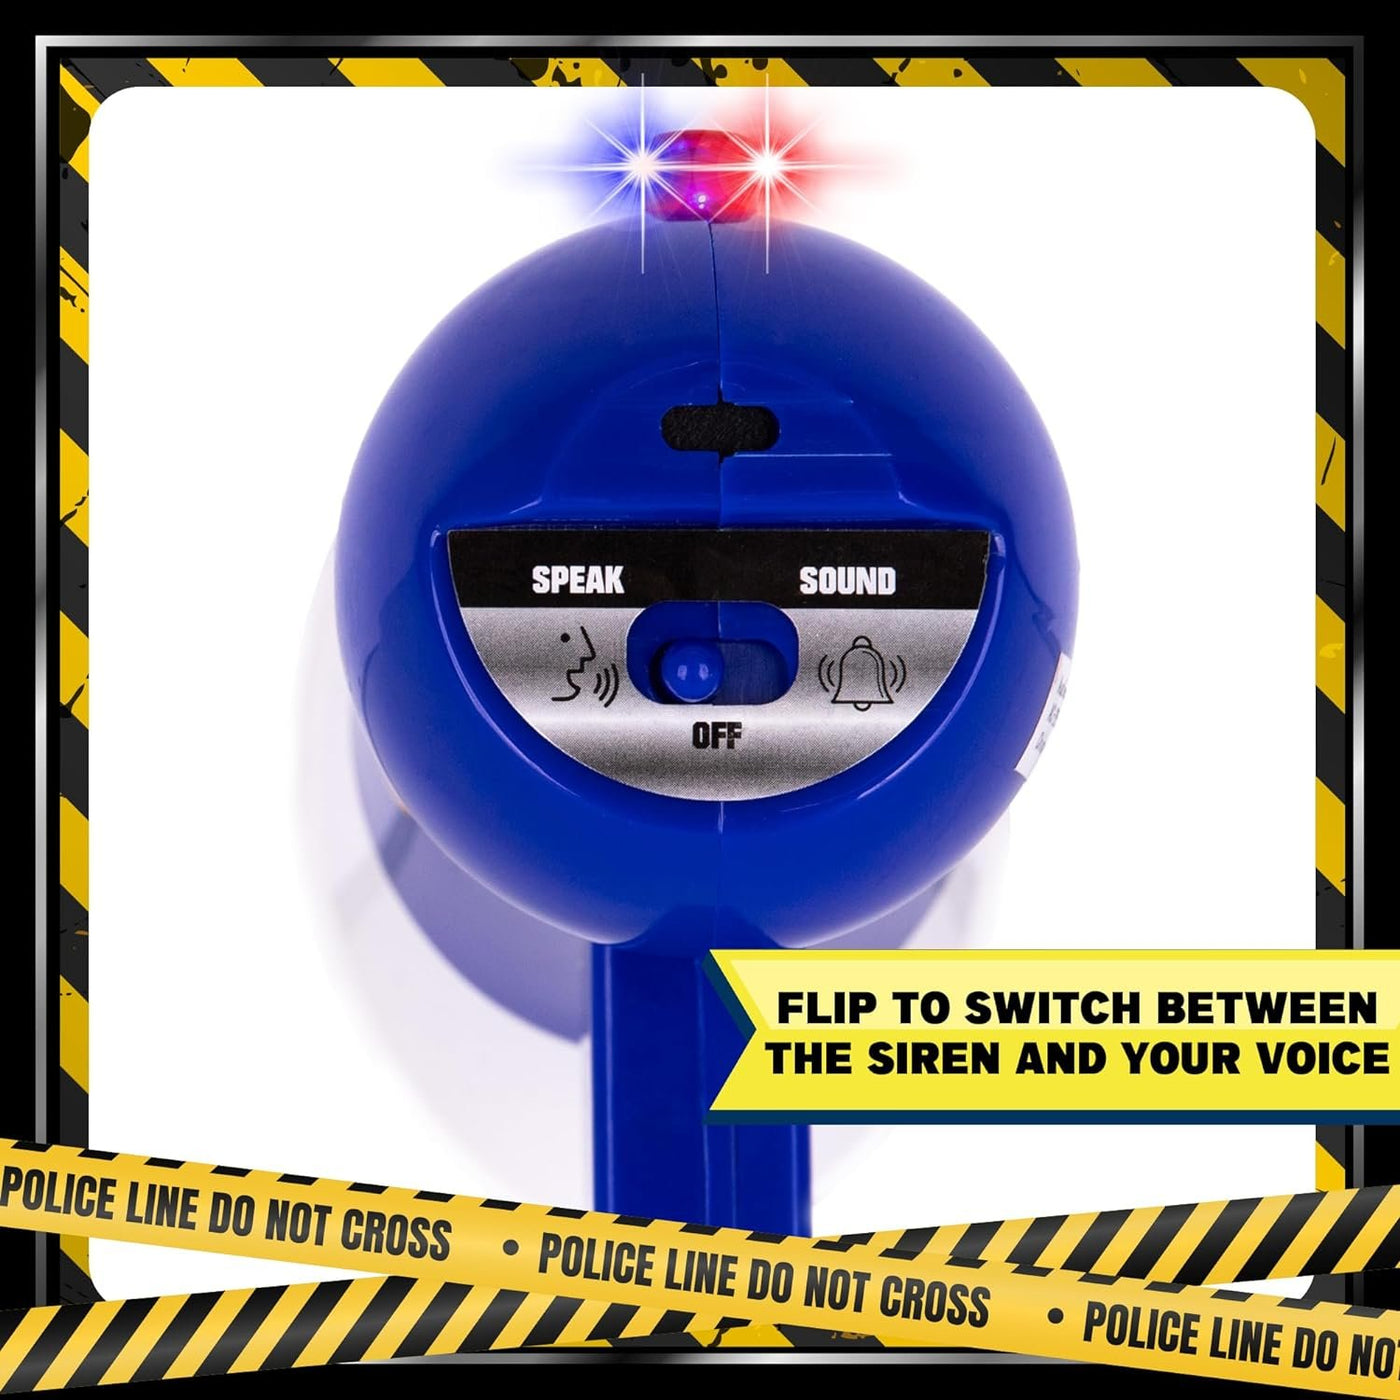 Police Megaphone Toy for Kids - Toy Megaphone with Police Badge - Siren Mode with Flashing Lights - Pretend Play Police Toys for Kids - Cop Costume Accessories for Hours of Fun